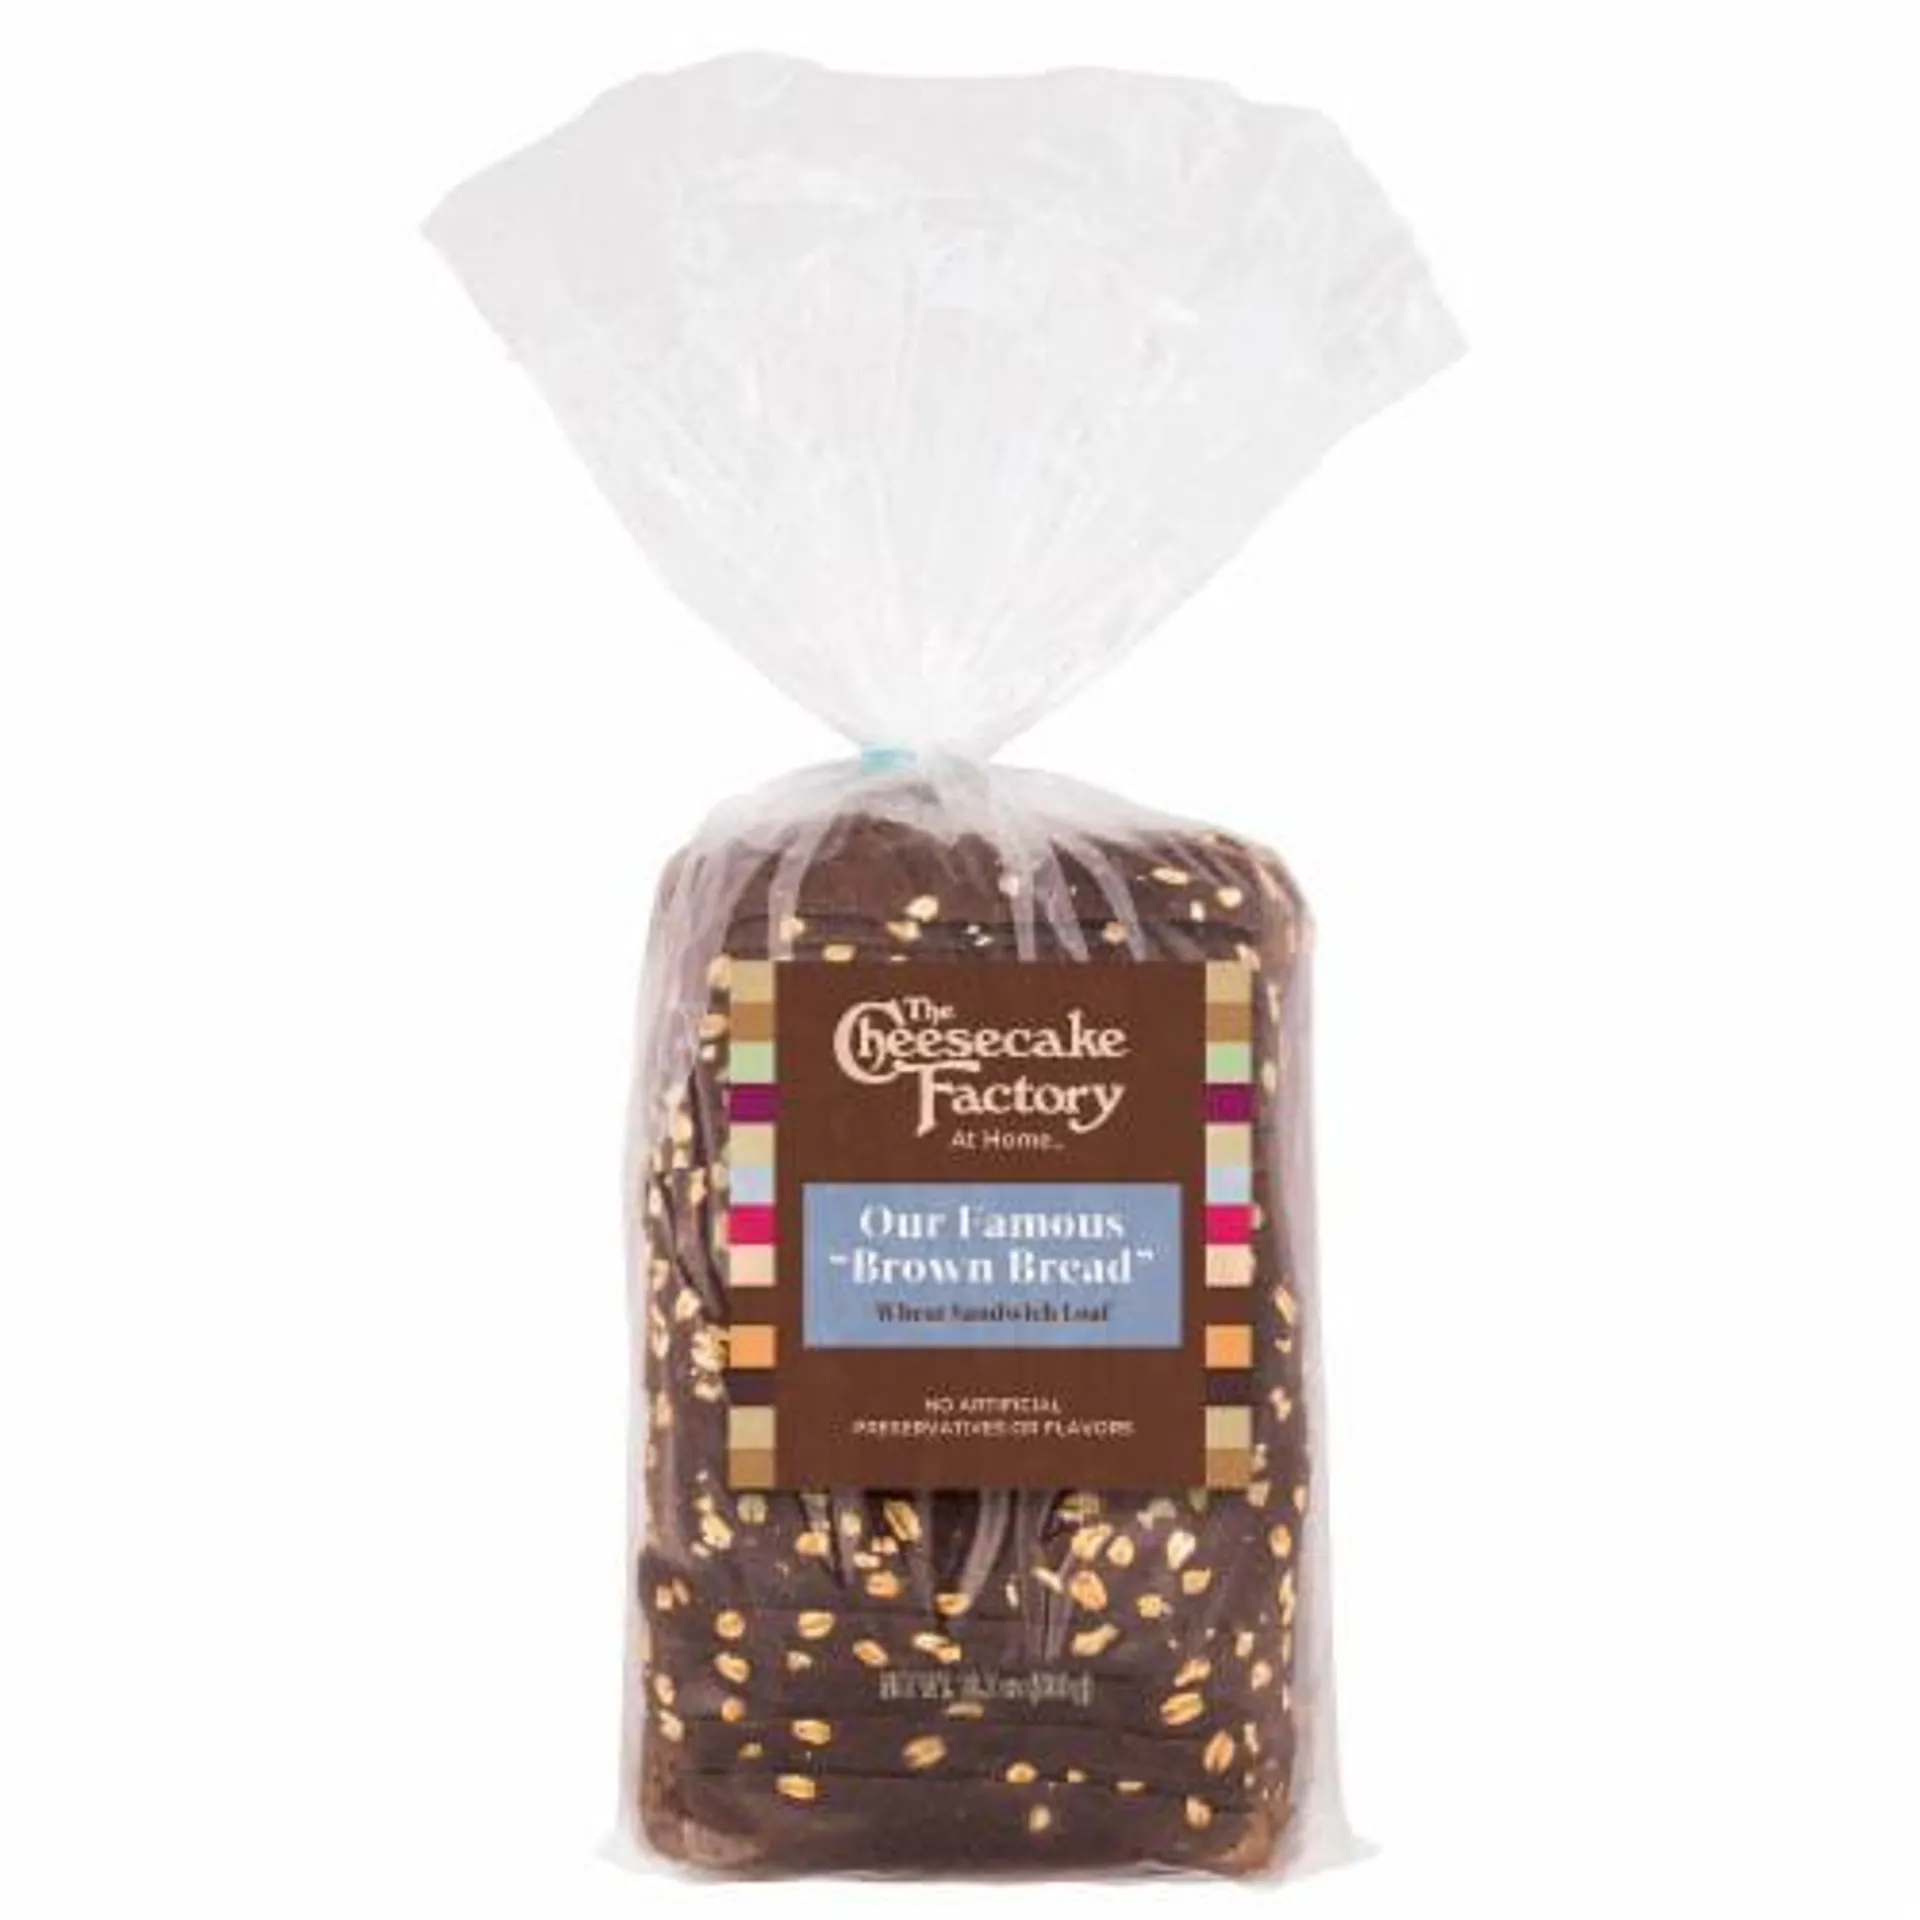 The Cheesecake Factory Brown Bread Wheat Sandwich Loaf